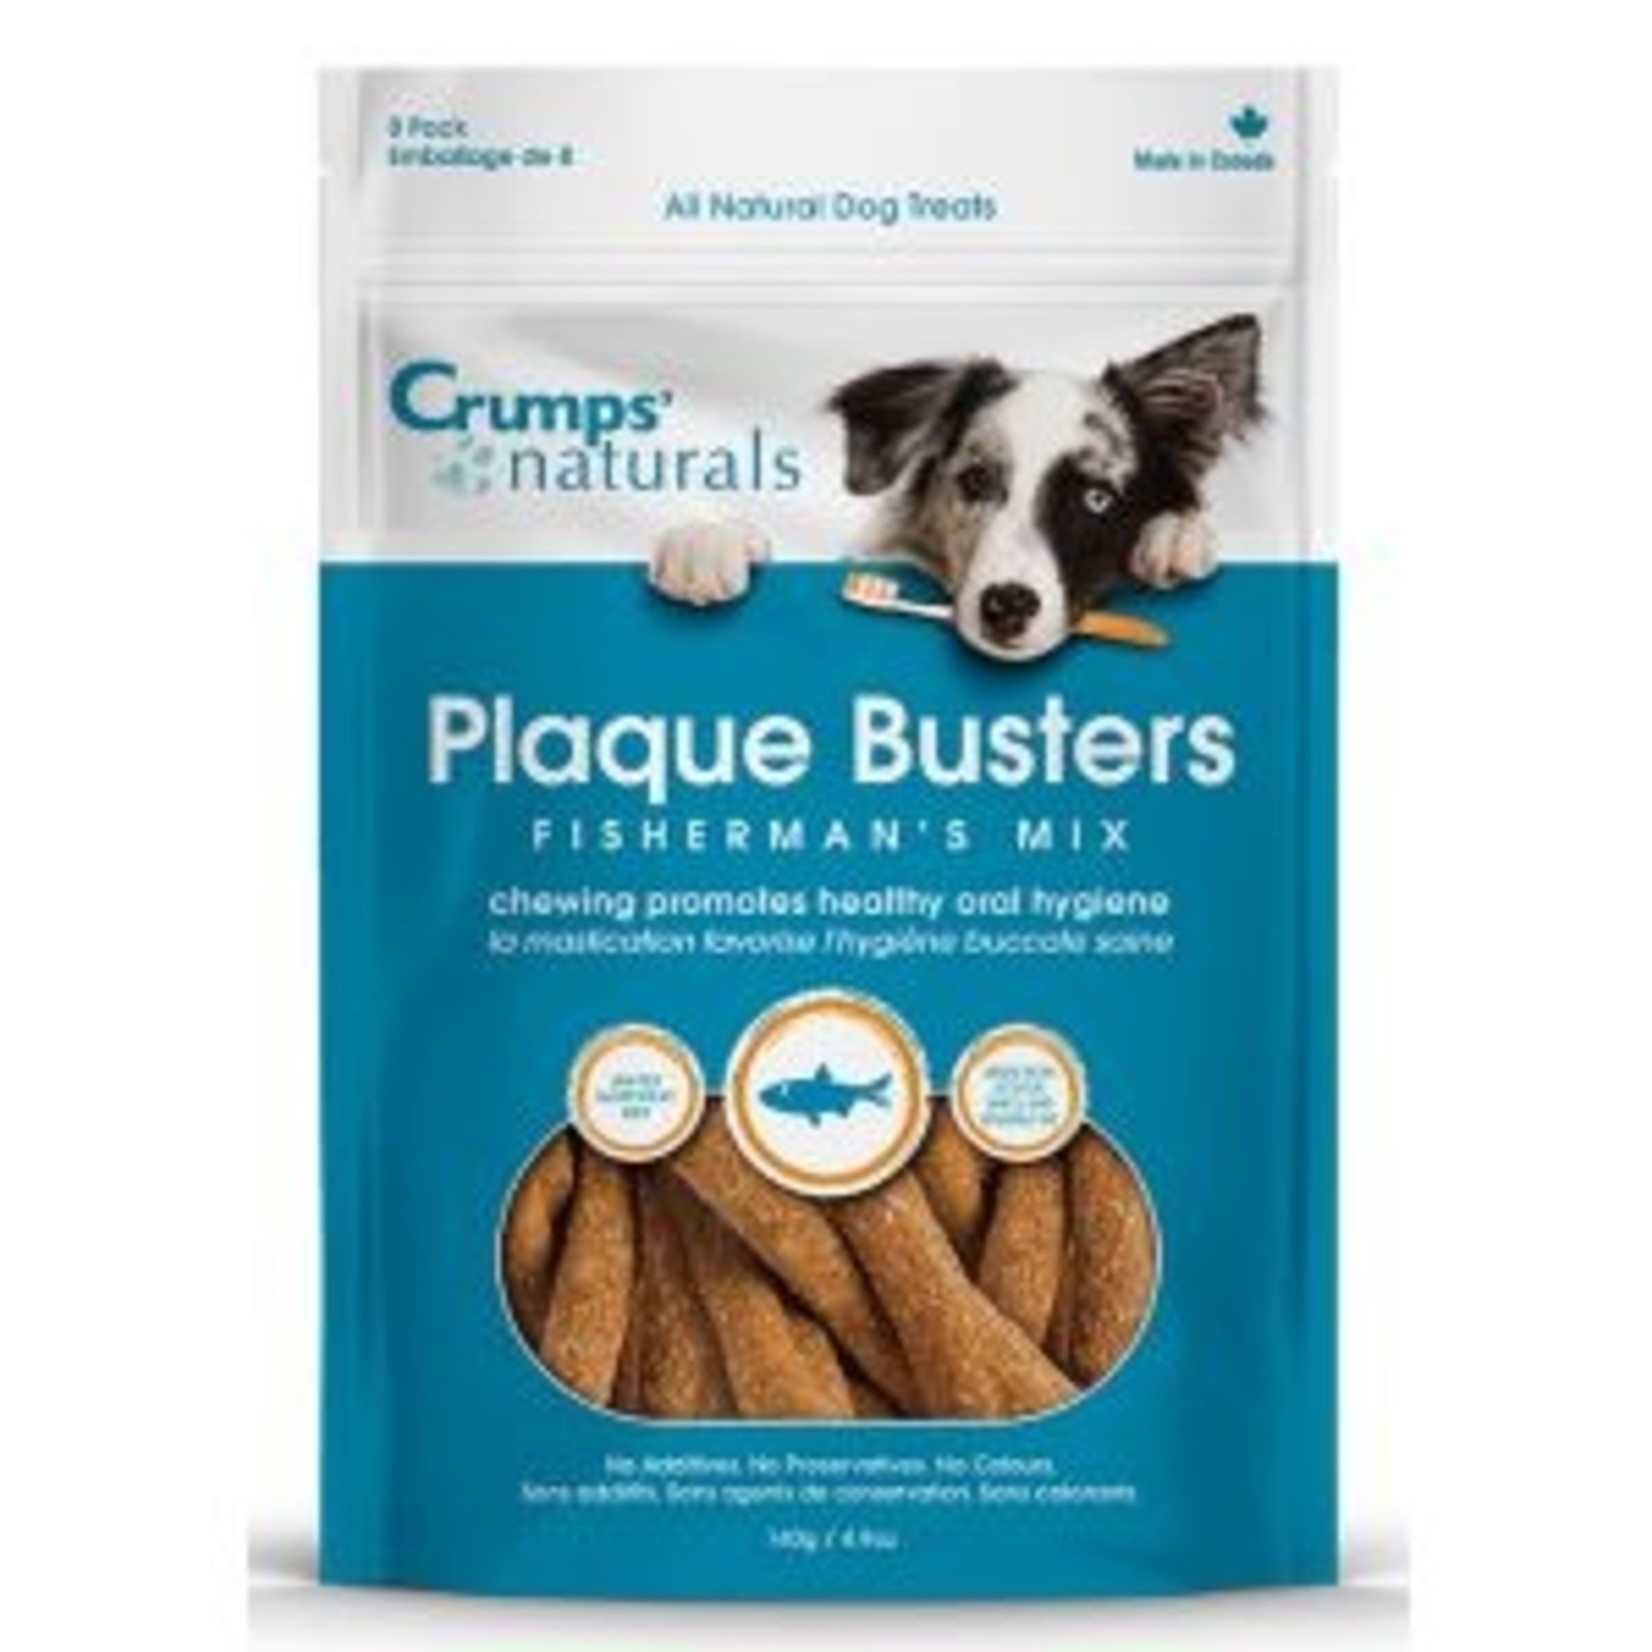 Crumps Crumps Plaque Busters bags